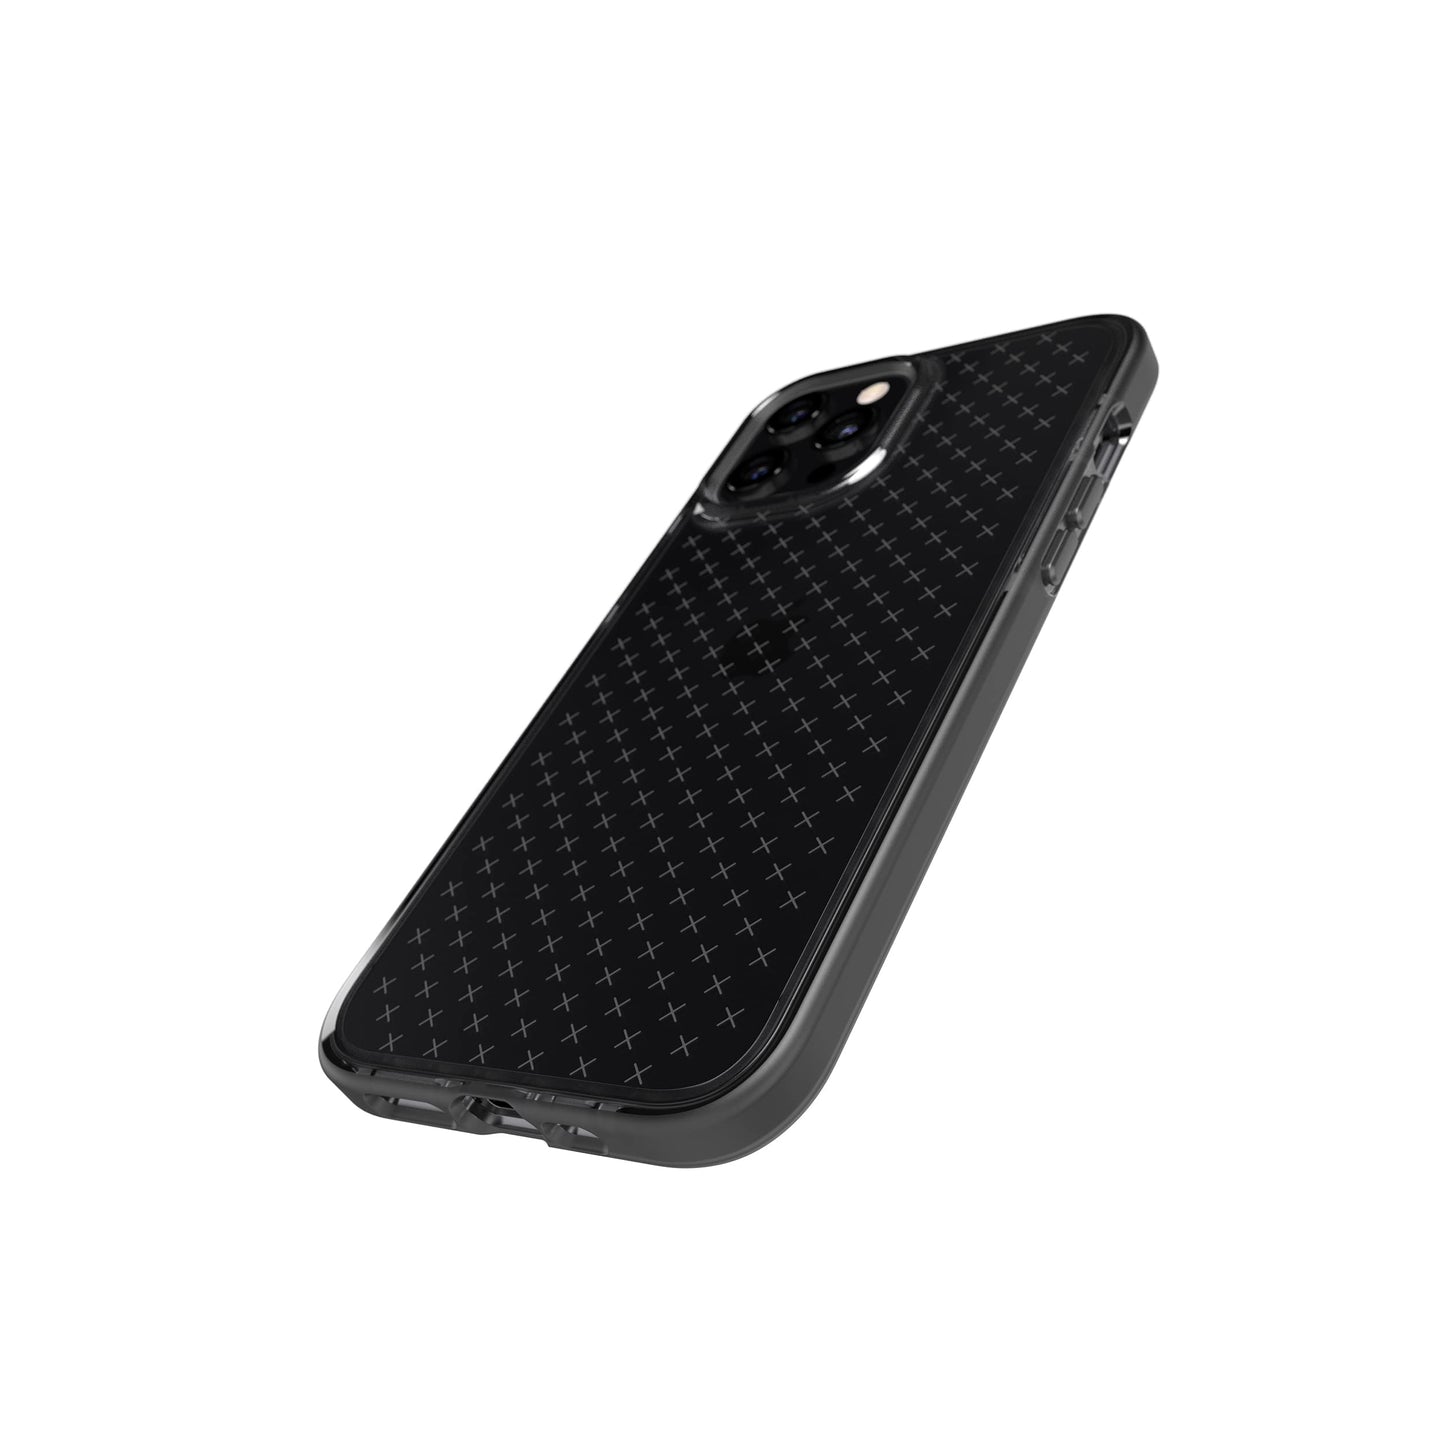 tech21 Evo Check Case for Apple iPhone 12 Pro Max with 12 ft Drop Protection, Smokey/Black